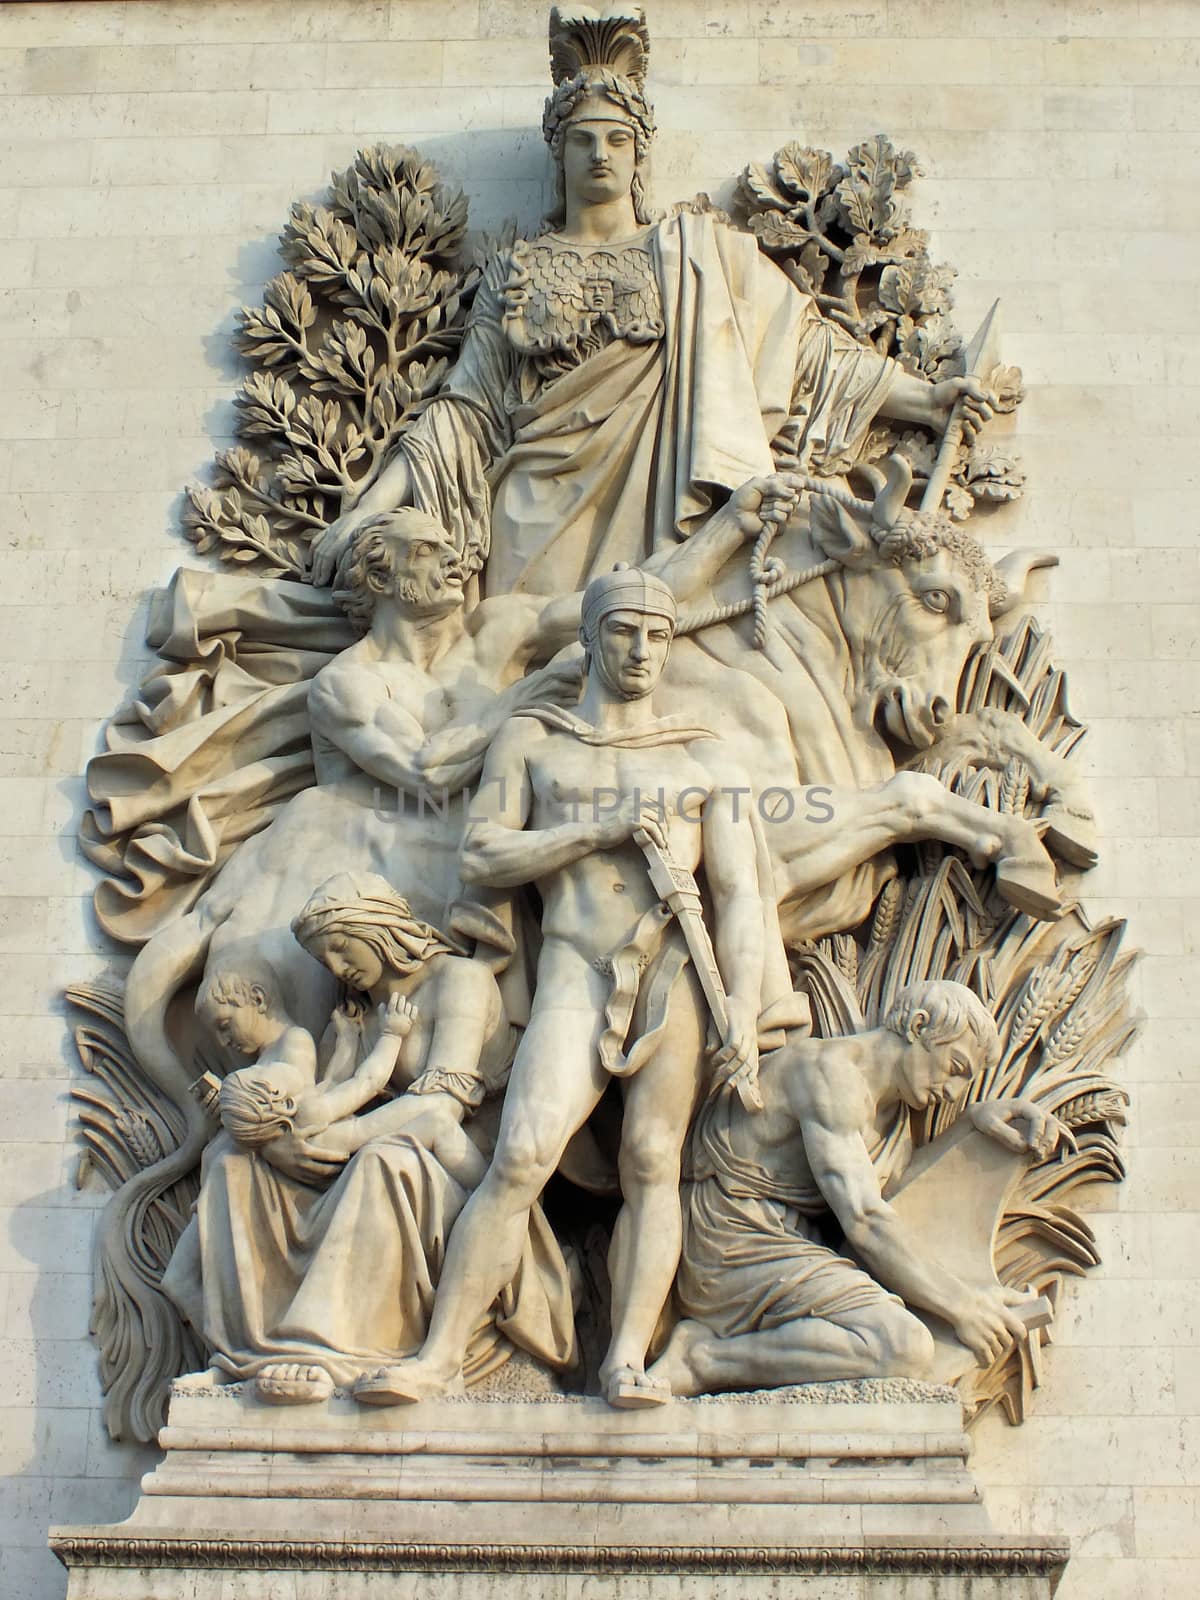 One of the four main sculptural groups on each of the Arc's pillars is La Paix de 1815, by Antoine Etex. It commemorates the Treaty of Paris, concluded in that year.